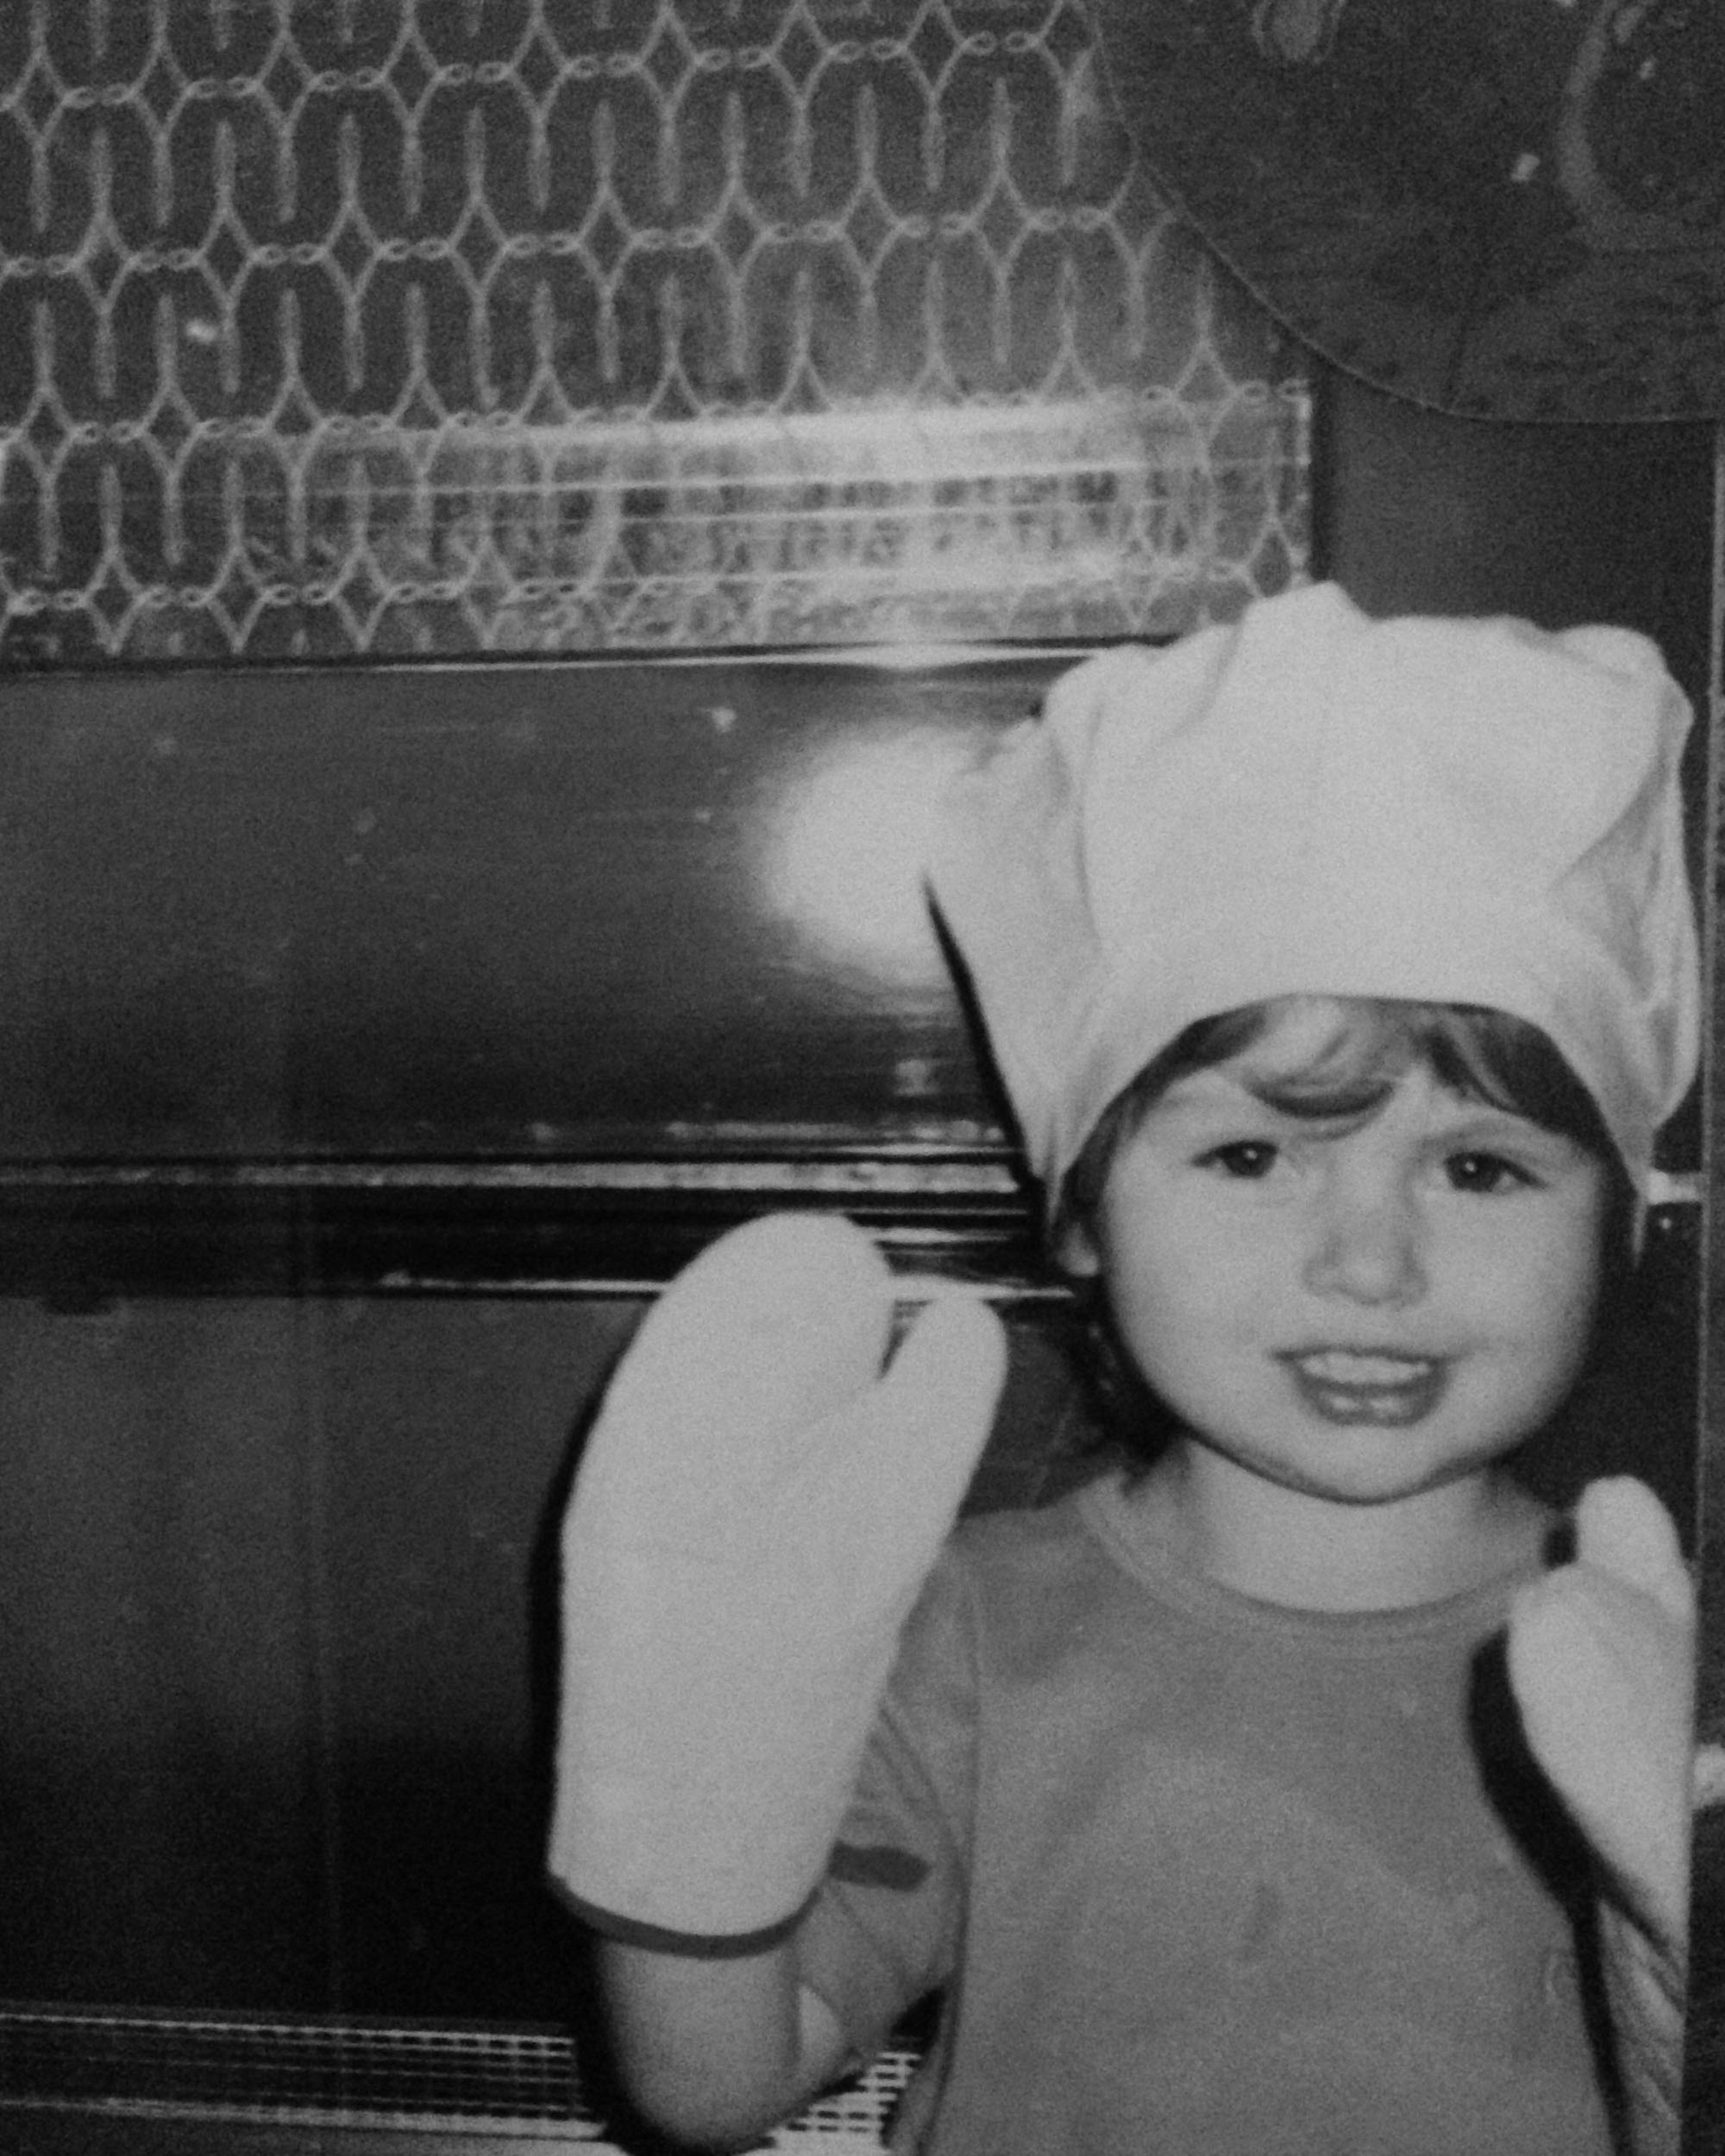 maman co-founder Elisa as a child with oven mitts on